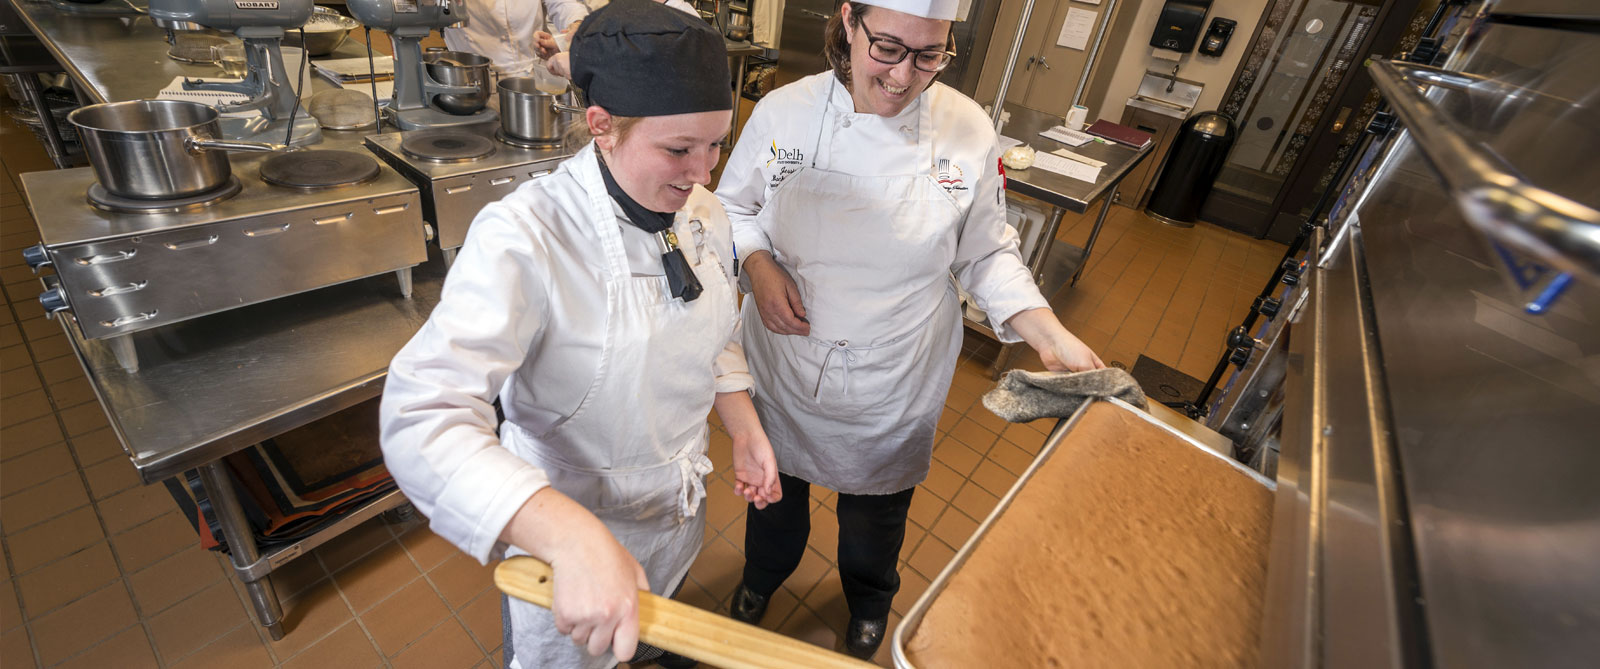 Culinary Arts Management Online